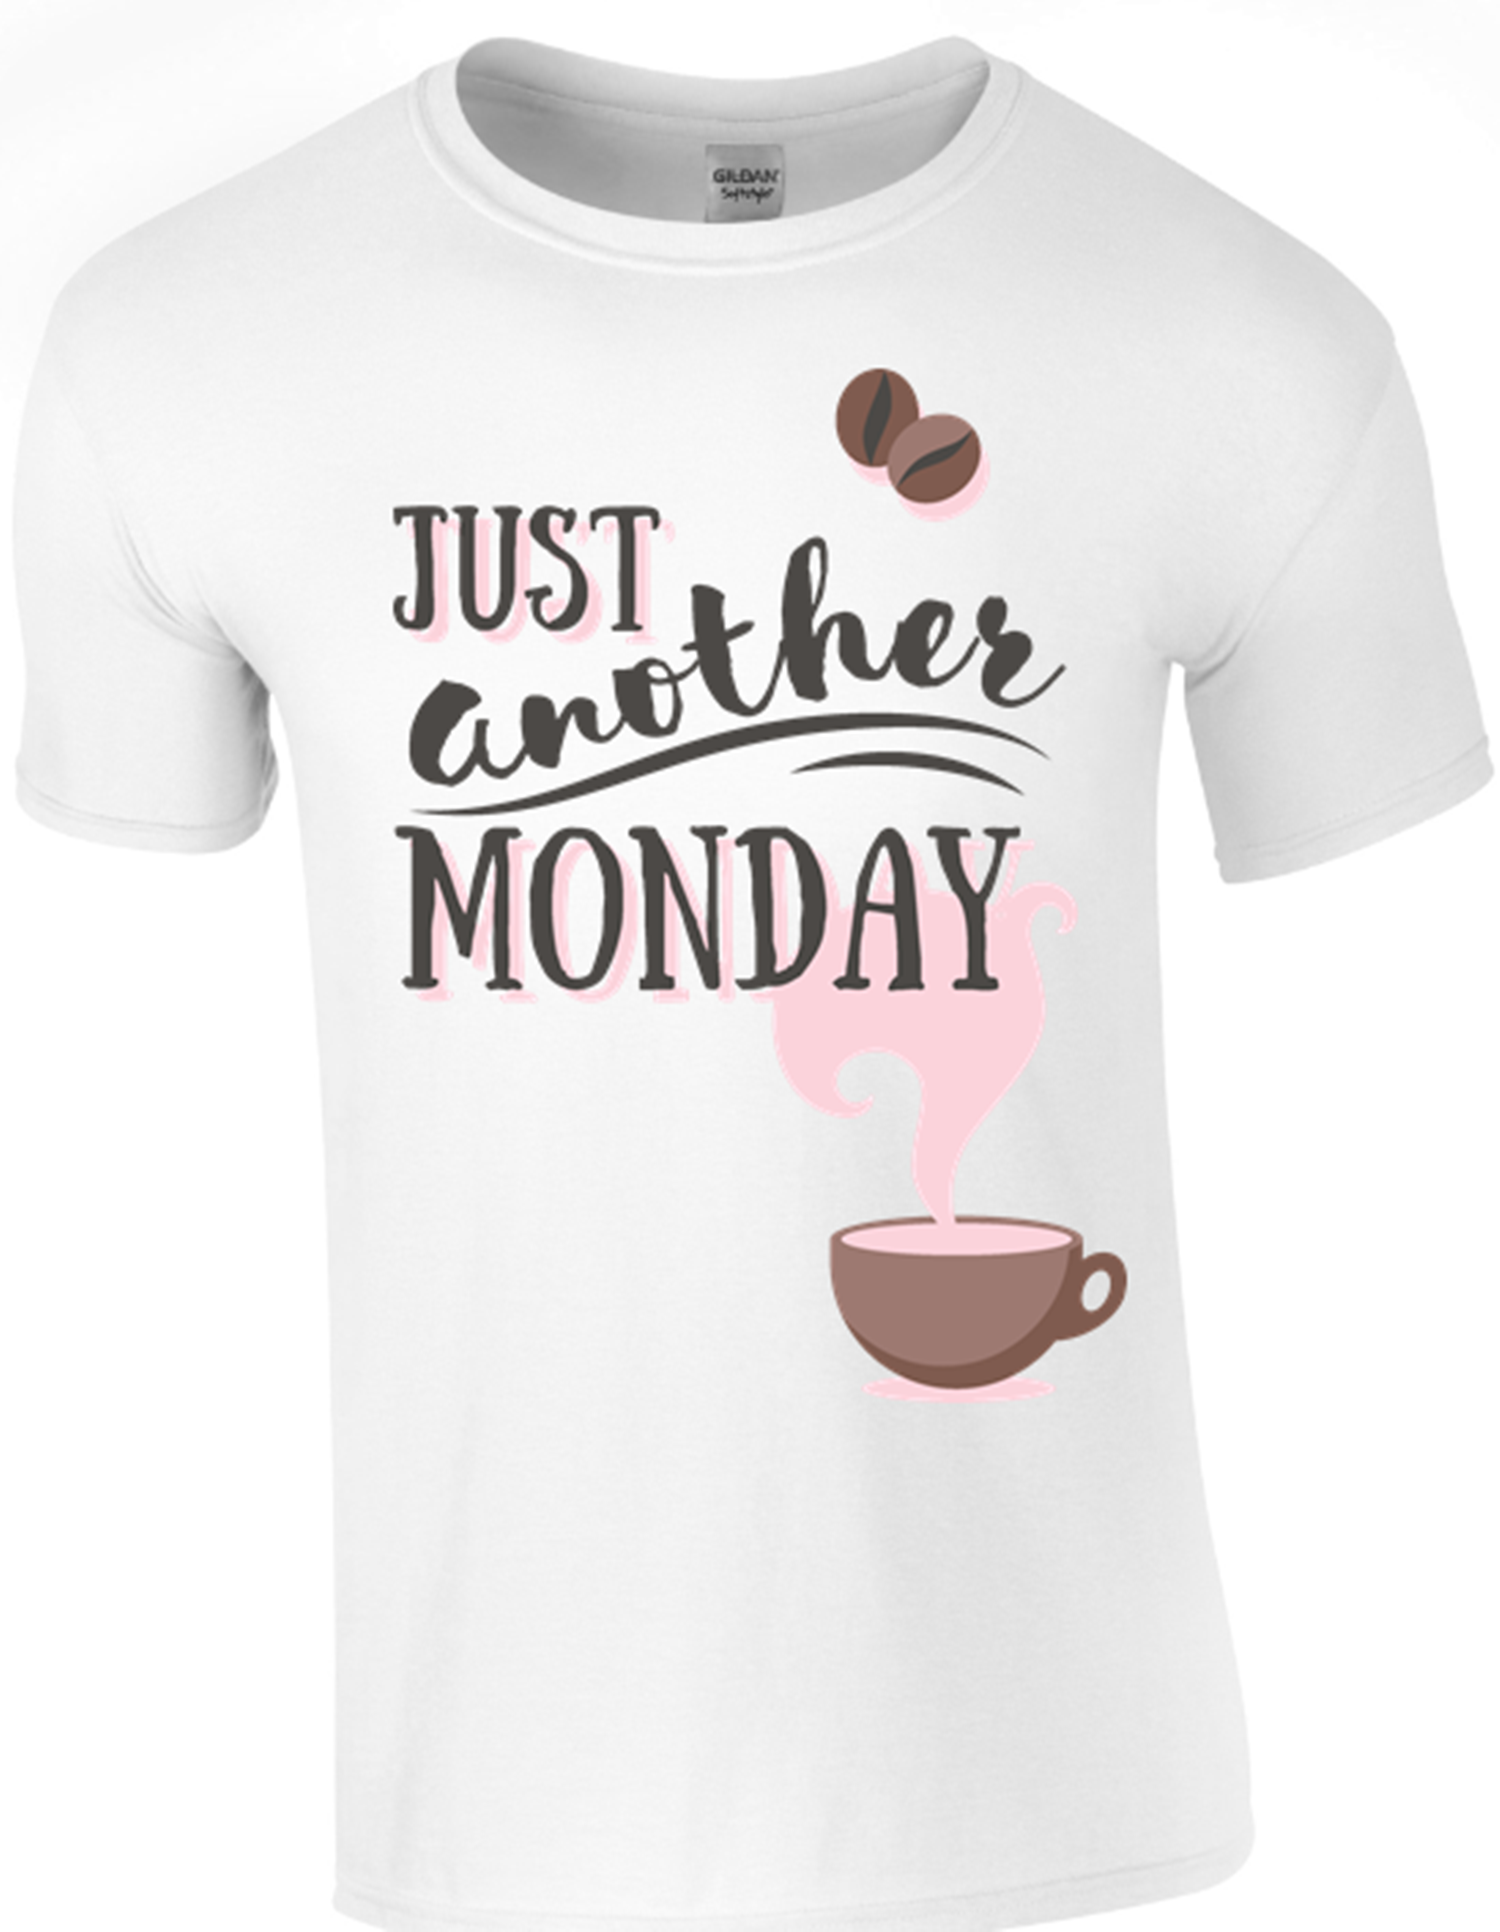 Just Another Monday T Shirt in White - Army 1157 kit S Army 1157 Kit Veterans Owned Business